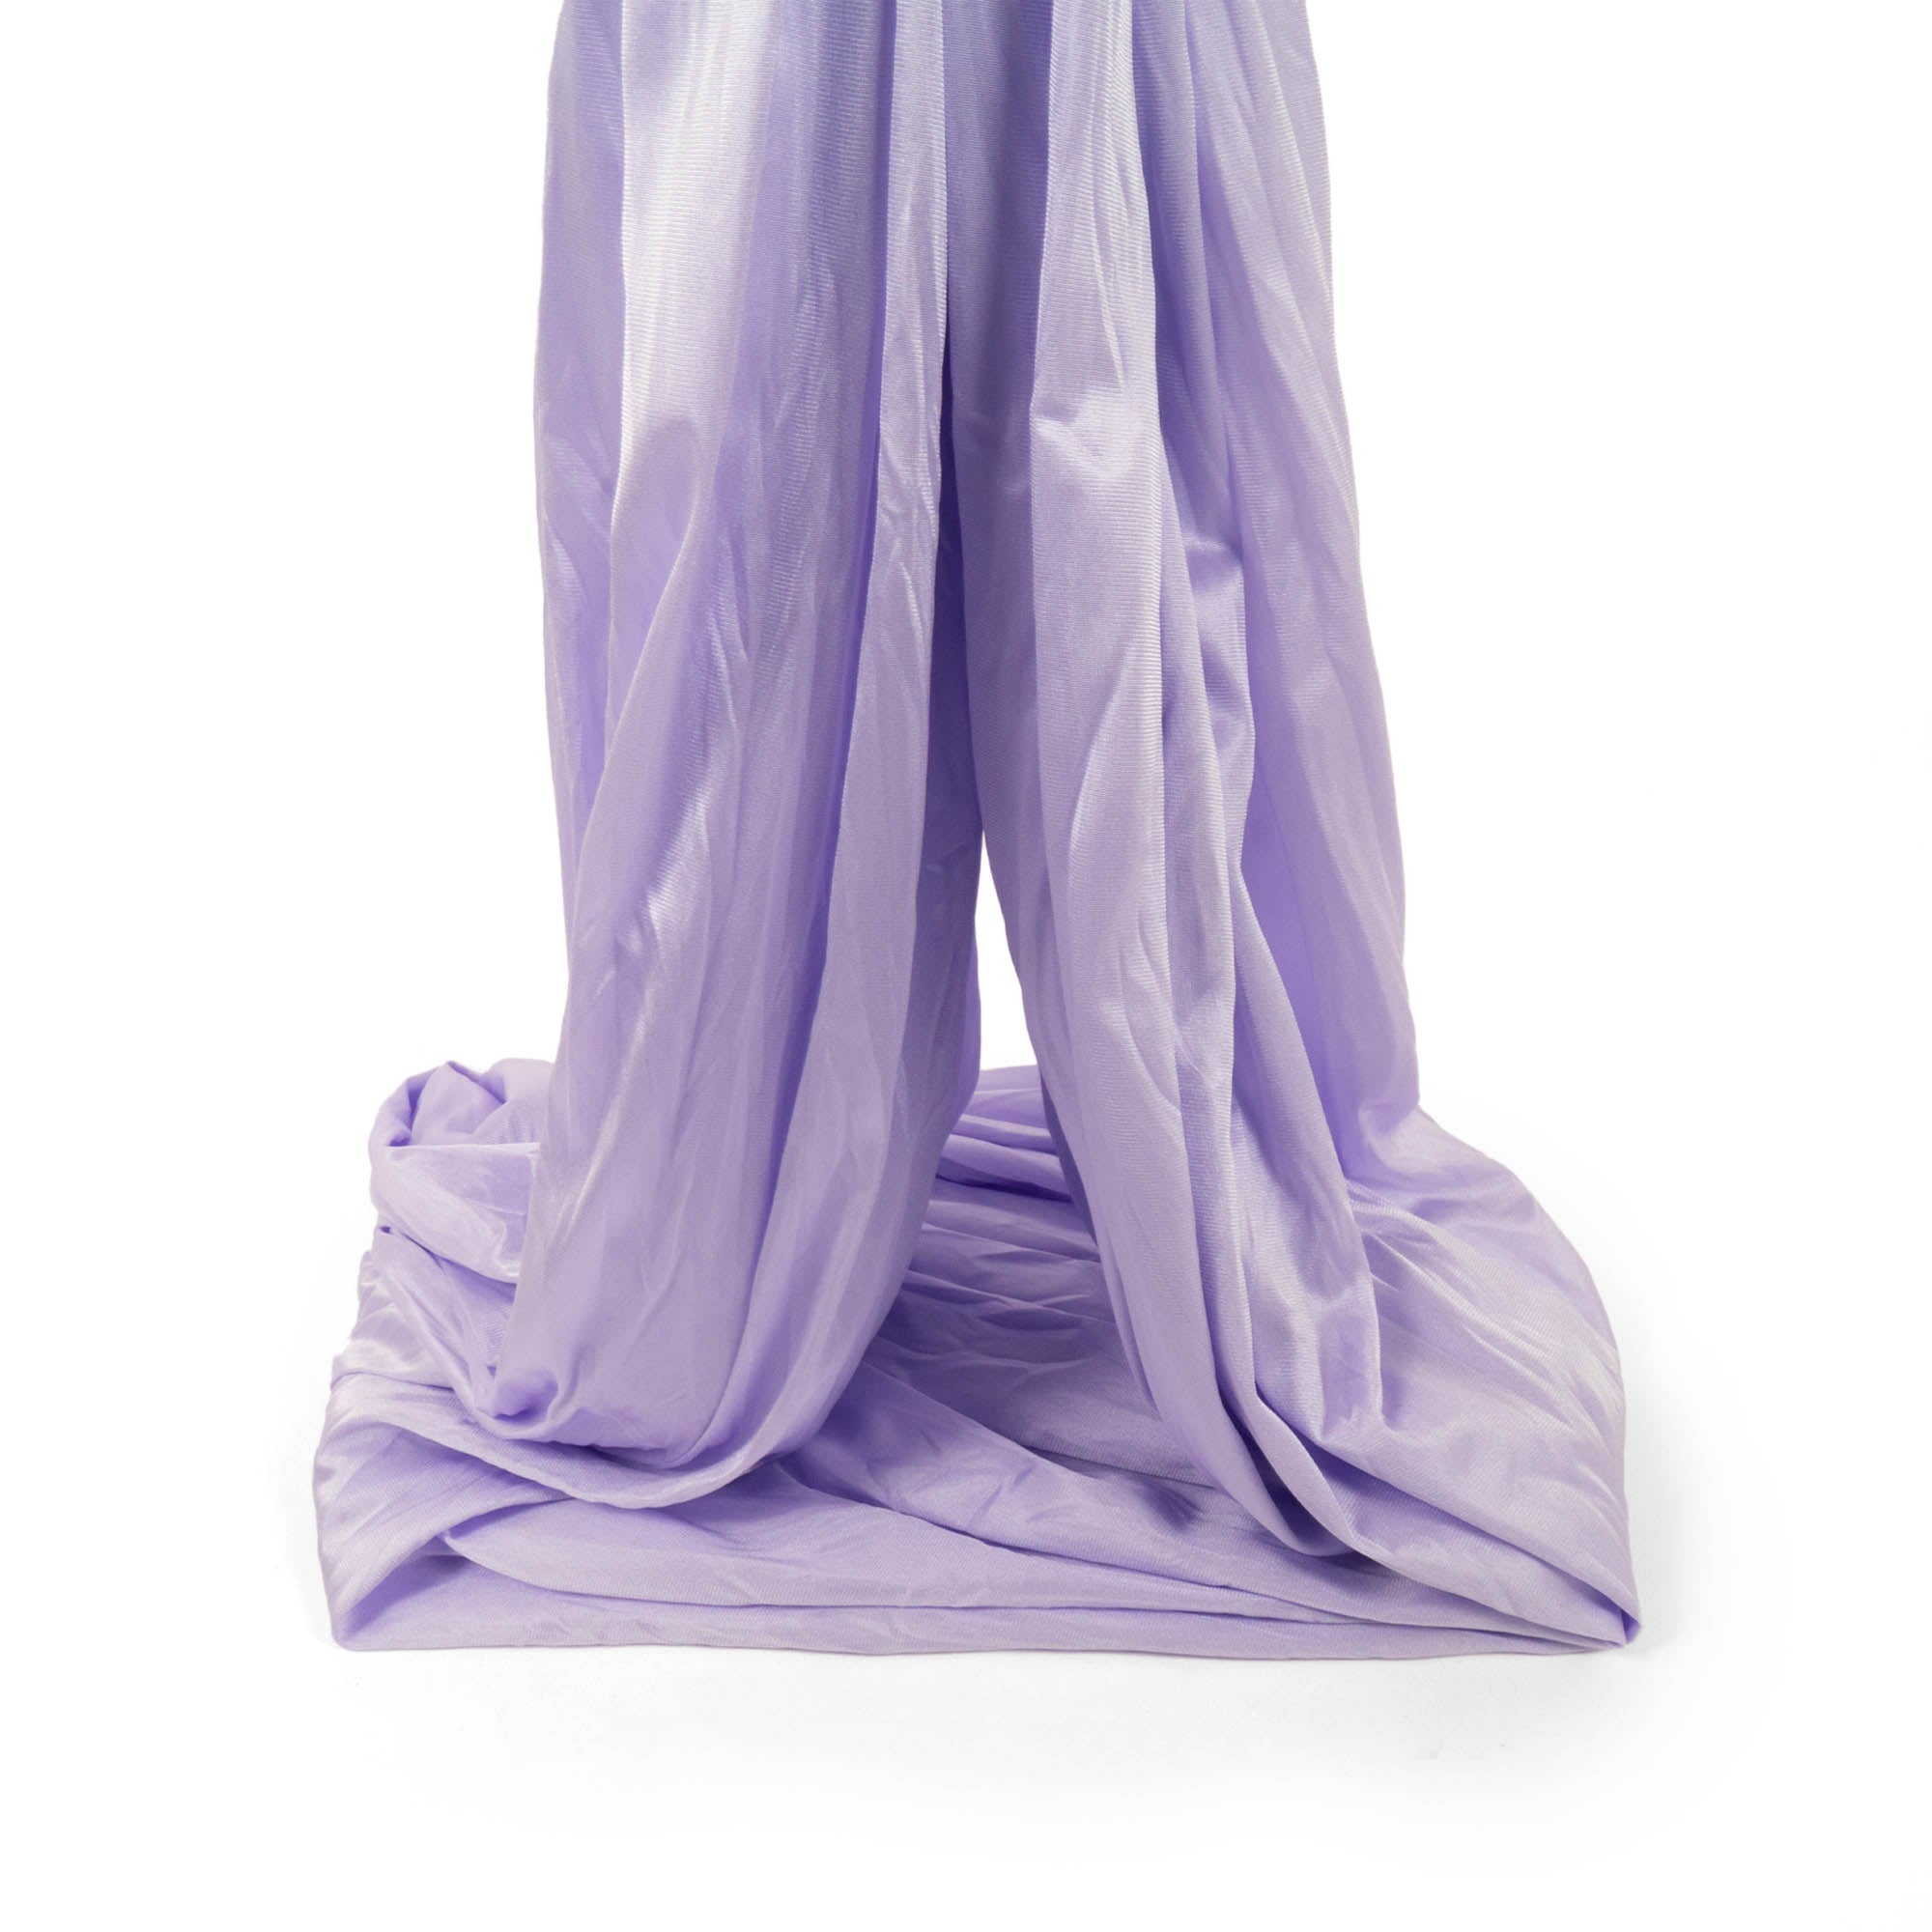 Prodigy 6m aerial yoga hammock piled up in lilac